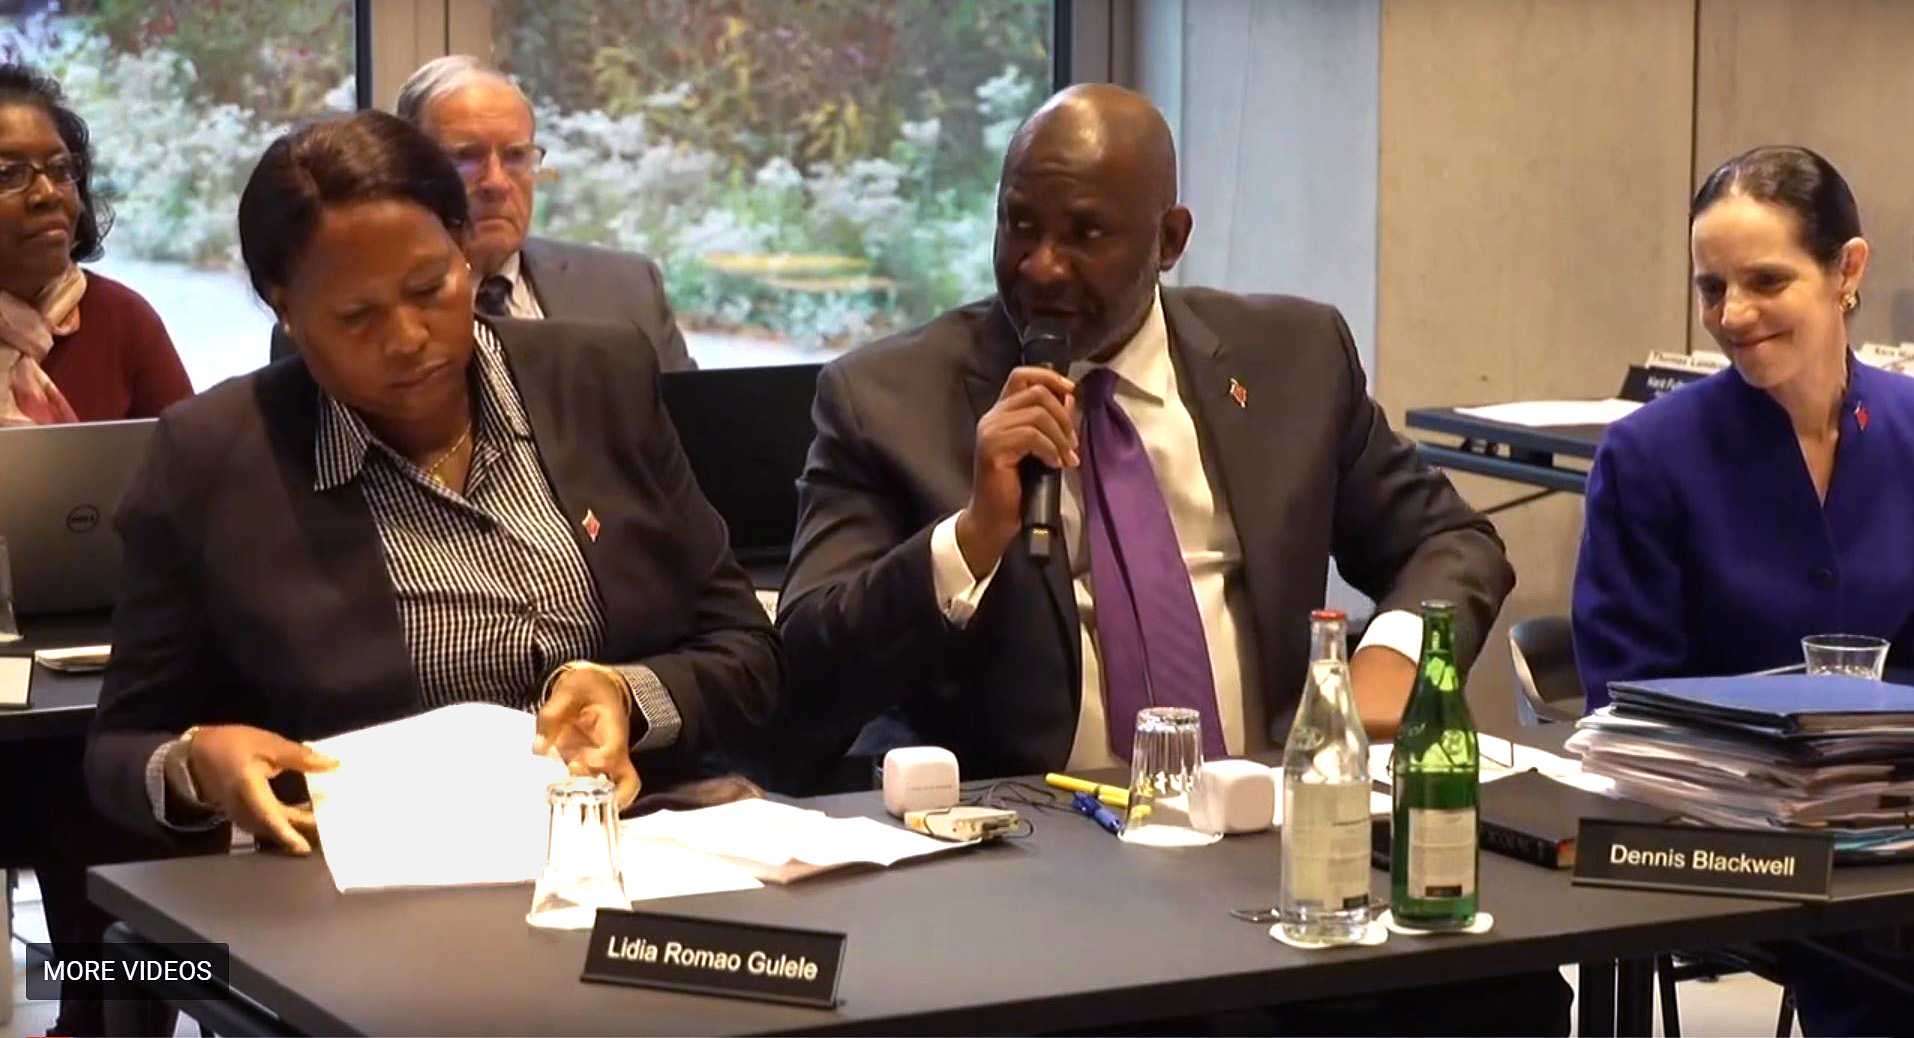 Judicial Council members ask questions during an oral hearing on Oct. 23 in Zurich. From left are members Lídia Romão Gulele, the Rev. Dennis Blackwell and Beth Capen. Screengrab from oral hearings video. 